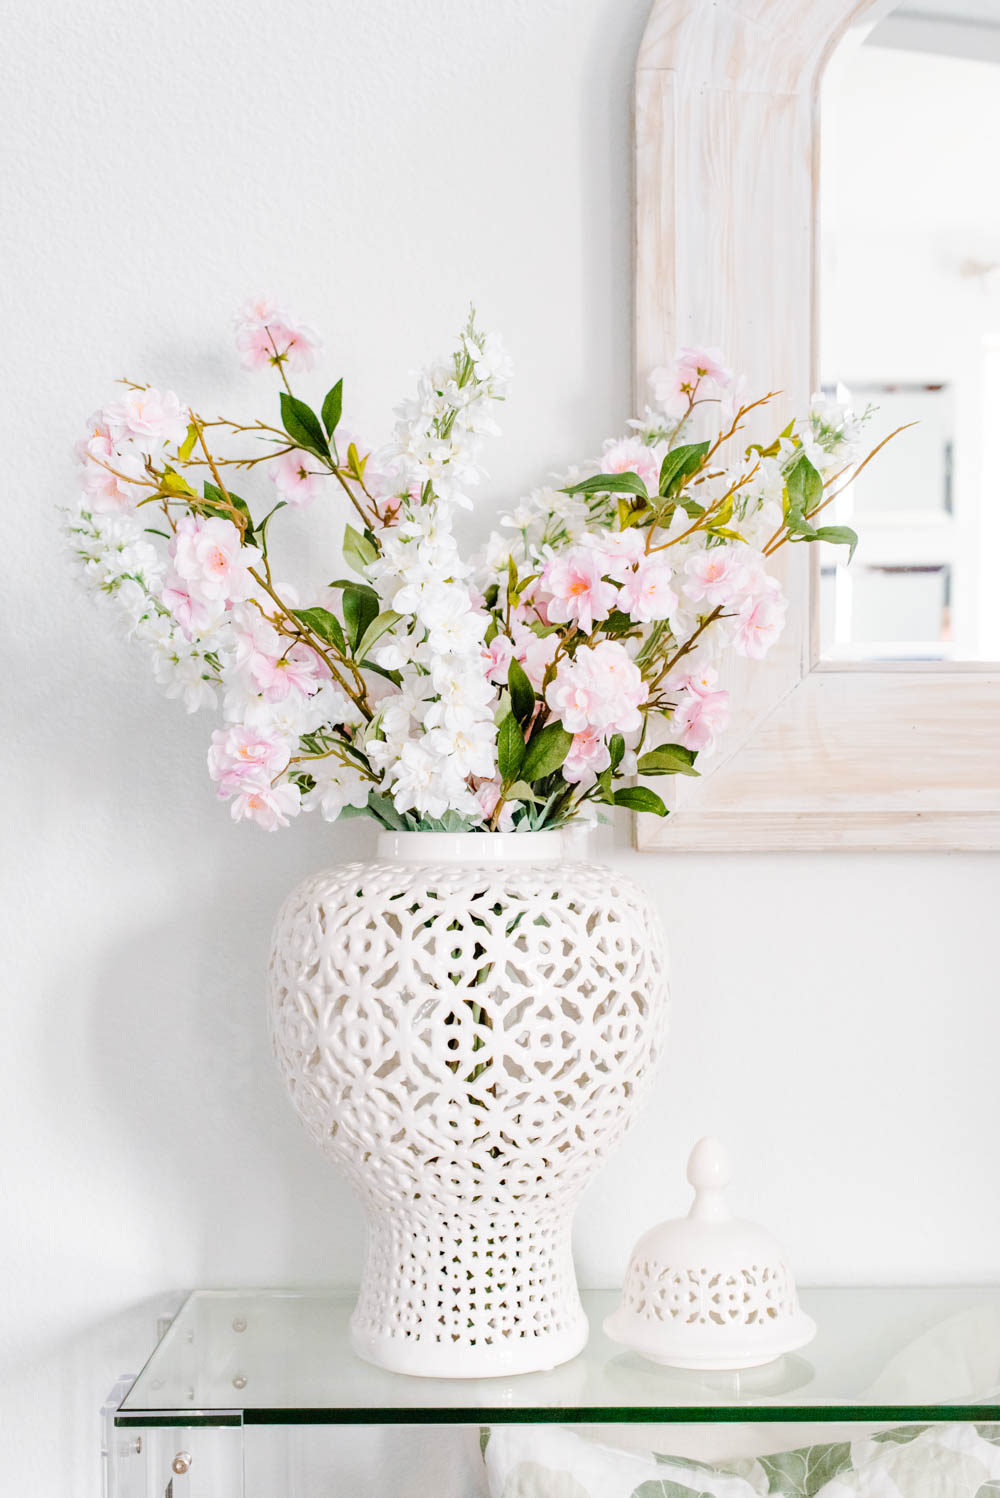  Best ideas on how to decorate with vases! A variety of beautiful and affordable vases for any design style. #ABlissfulNest #vases #descoratingtips #homedecor #springdecor